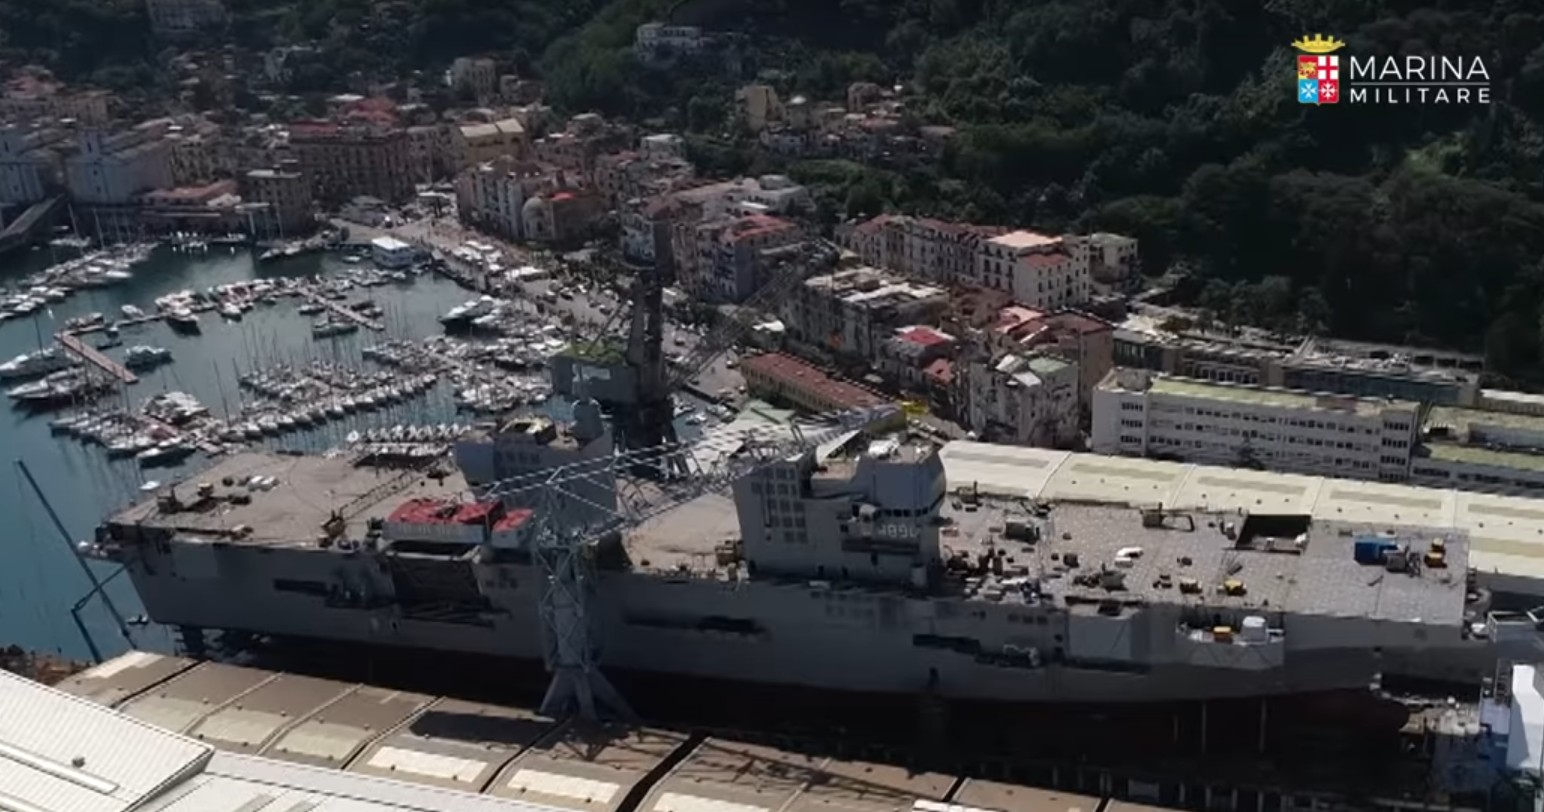 l-9890 its trieste lhd landing ship helicopter dock nave italian navy marina militare 06